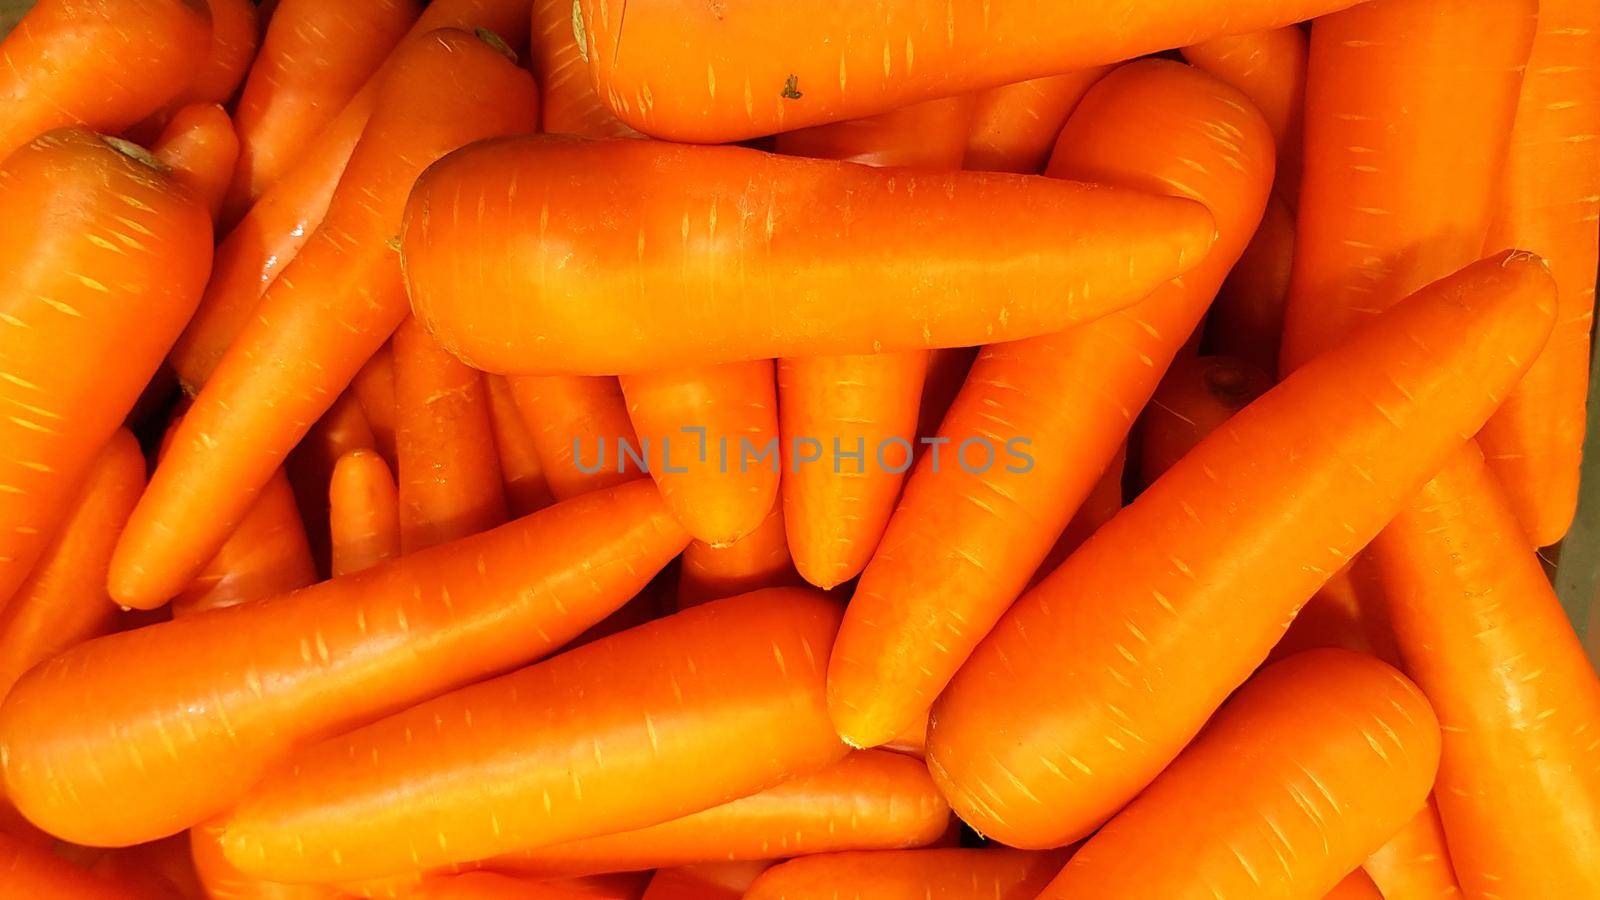 Many carrots are placed together in the shop for sale. by pichai25